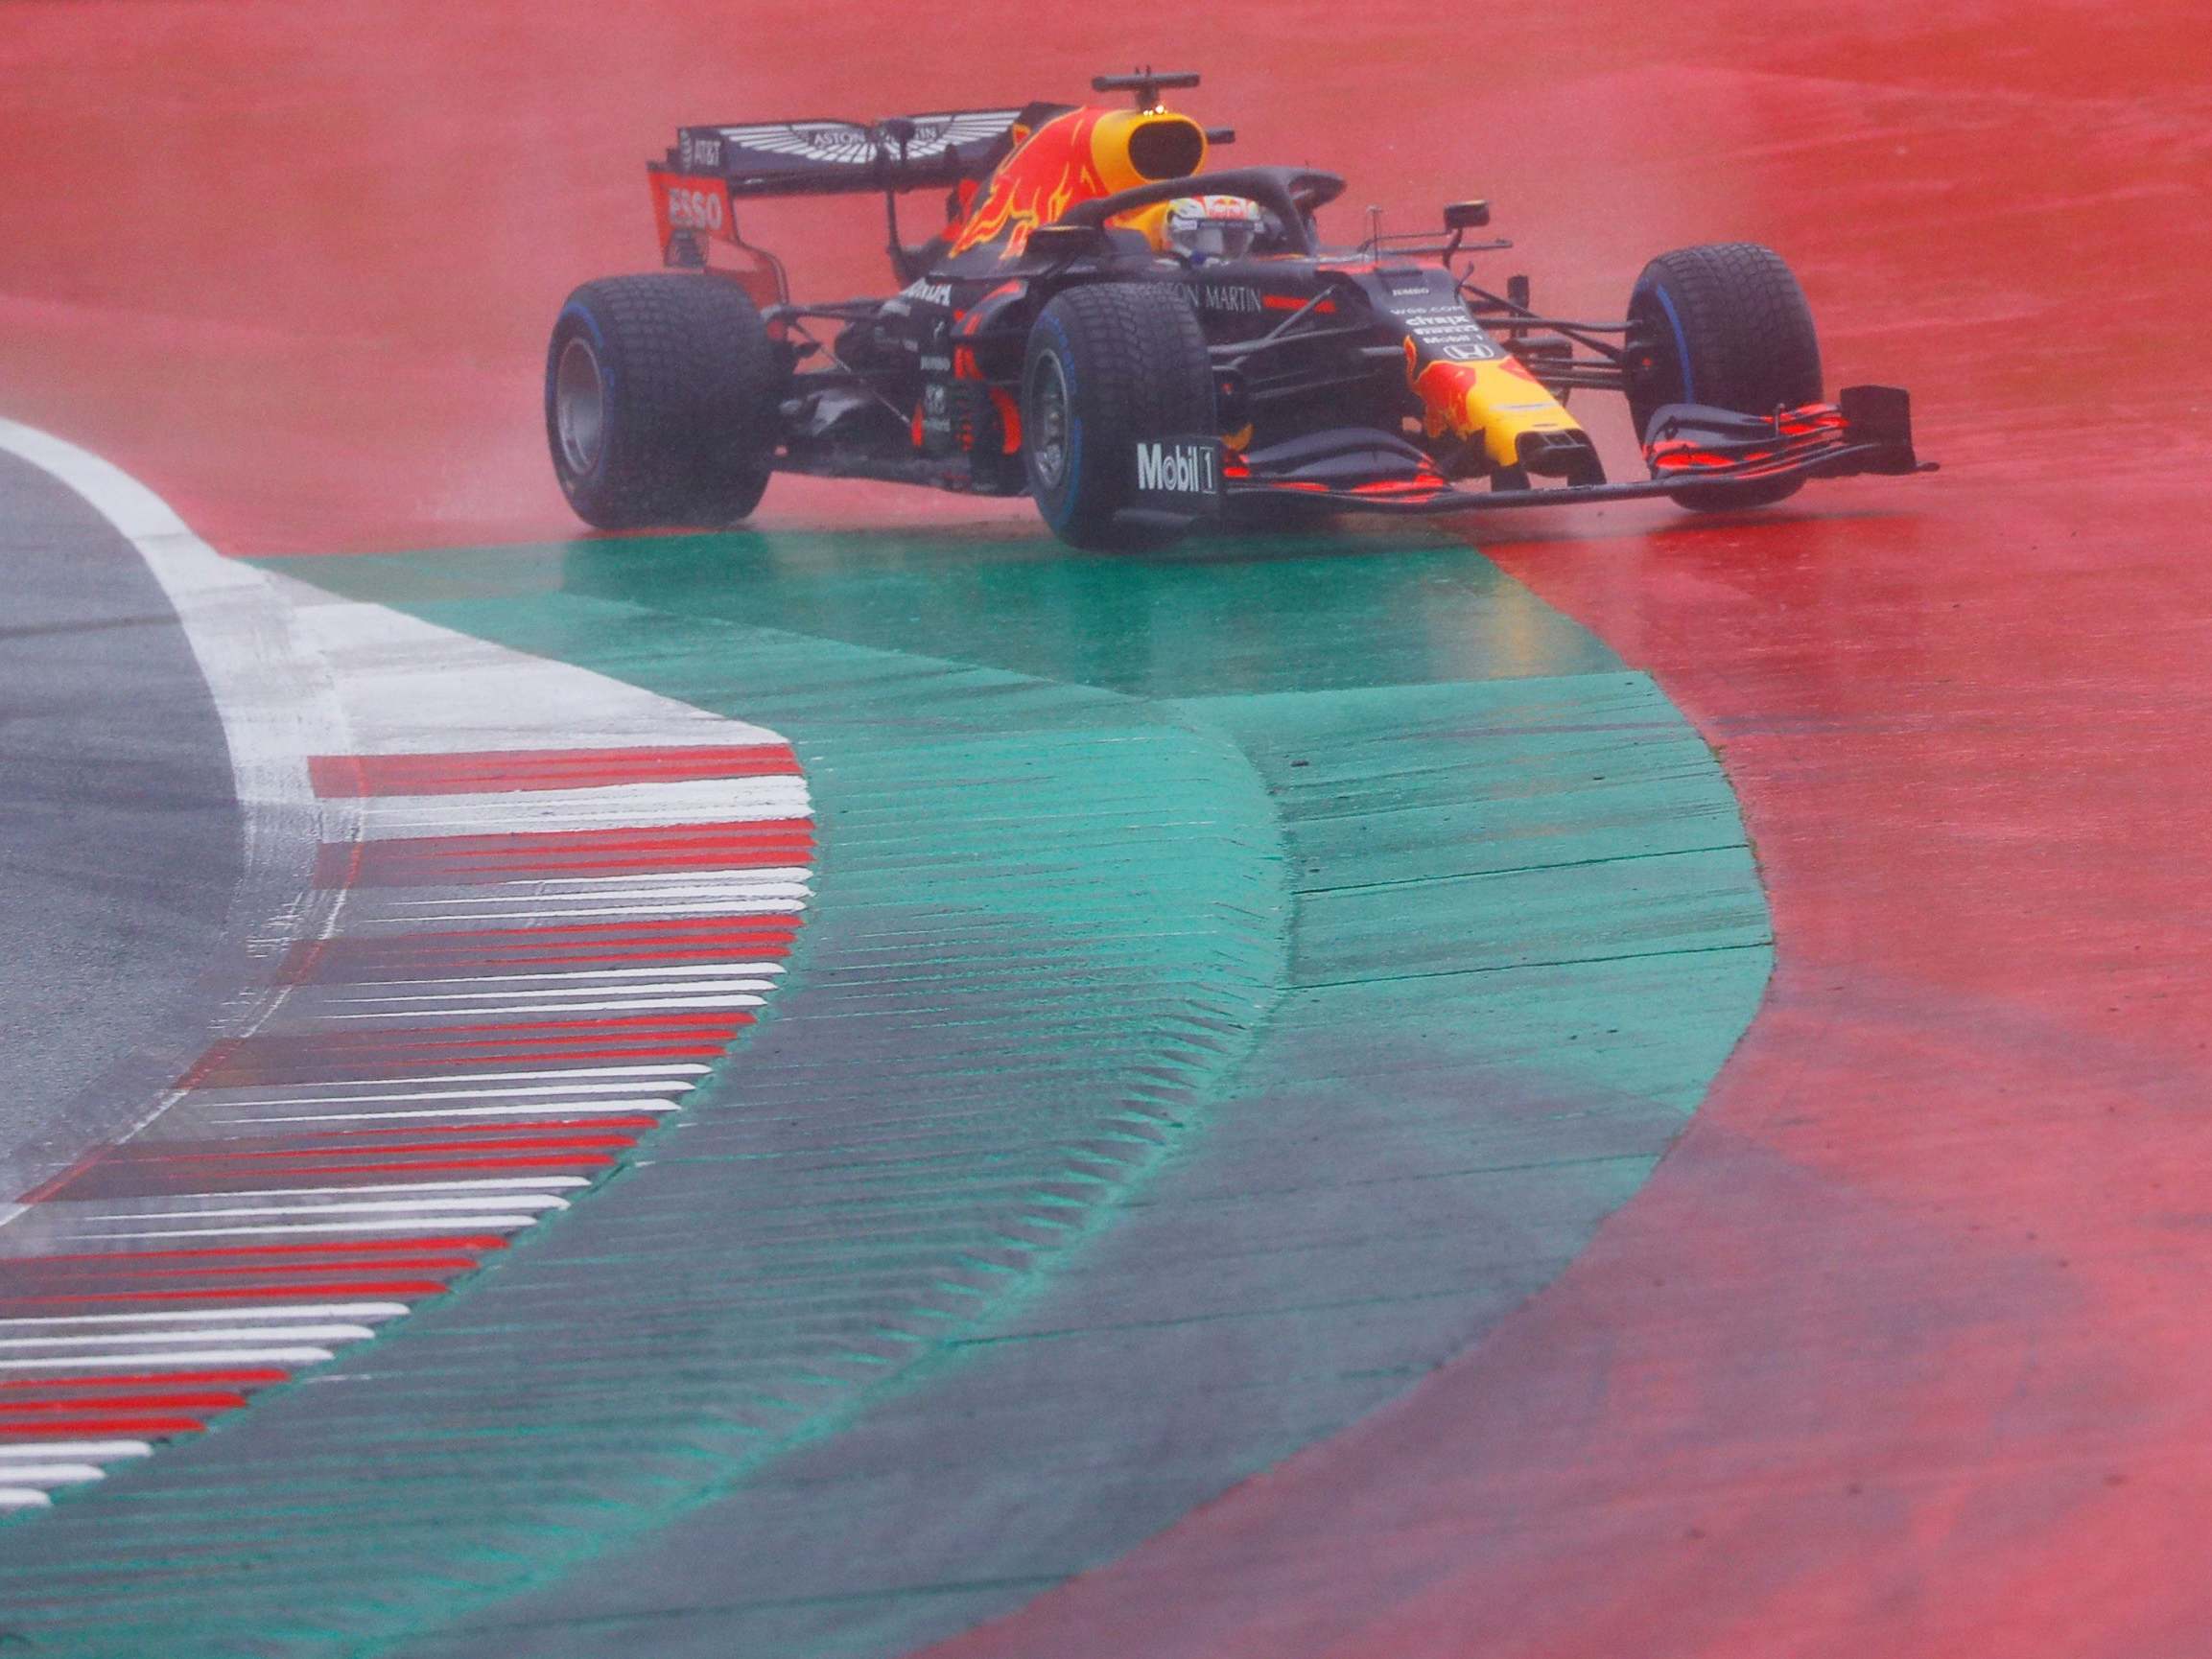 Max Verstappen went off at the final turn on his last run in qualifying